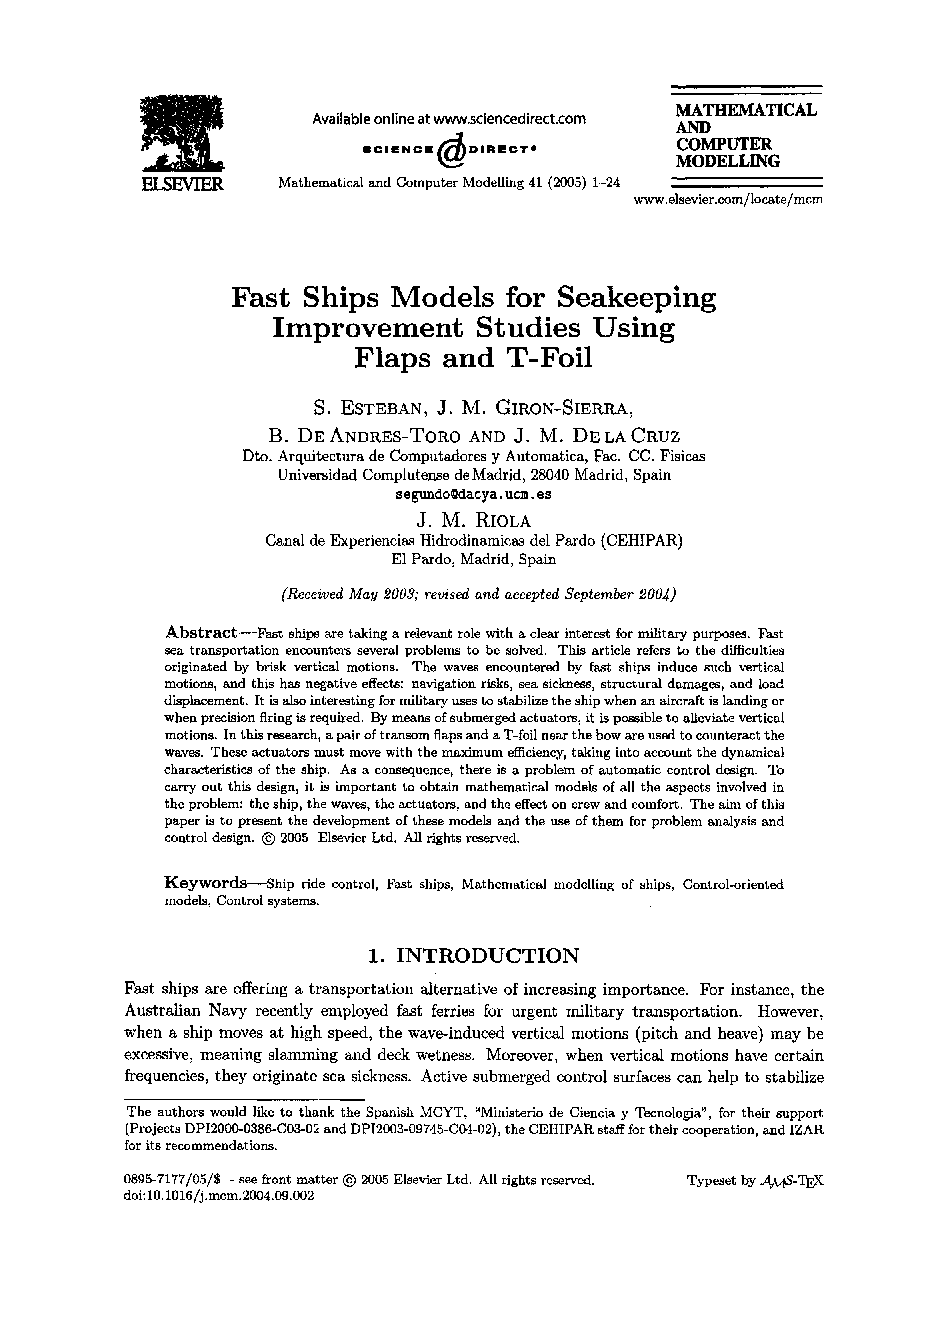 Fast ships models for seakeeping improvement studies using flaps and T-foil